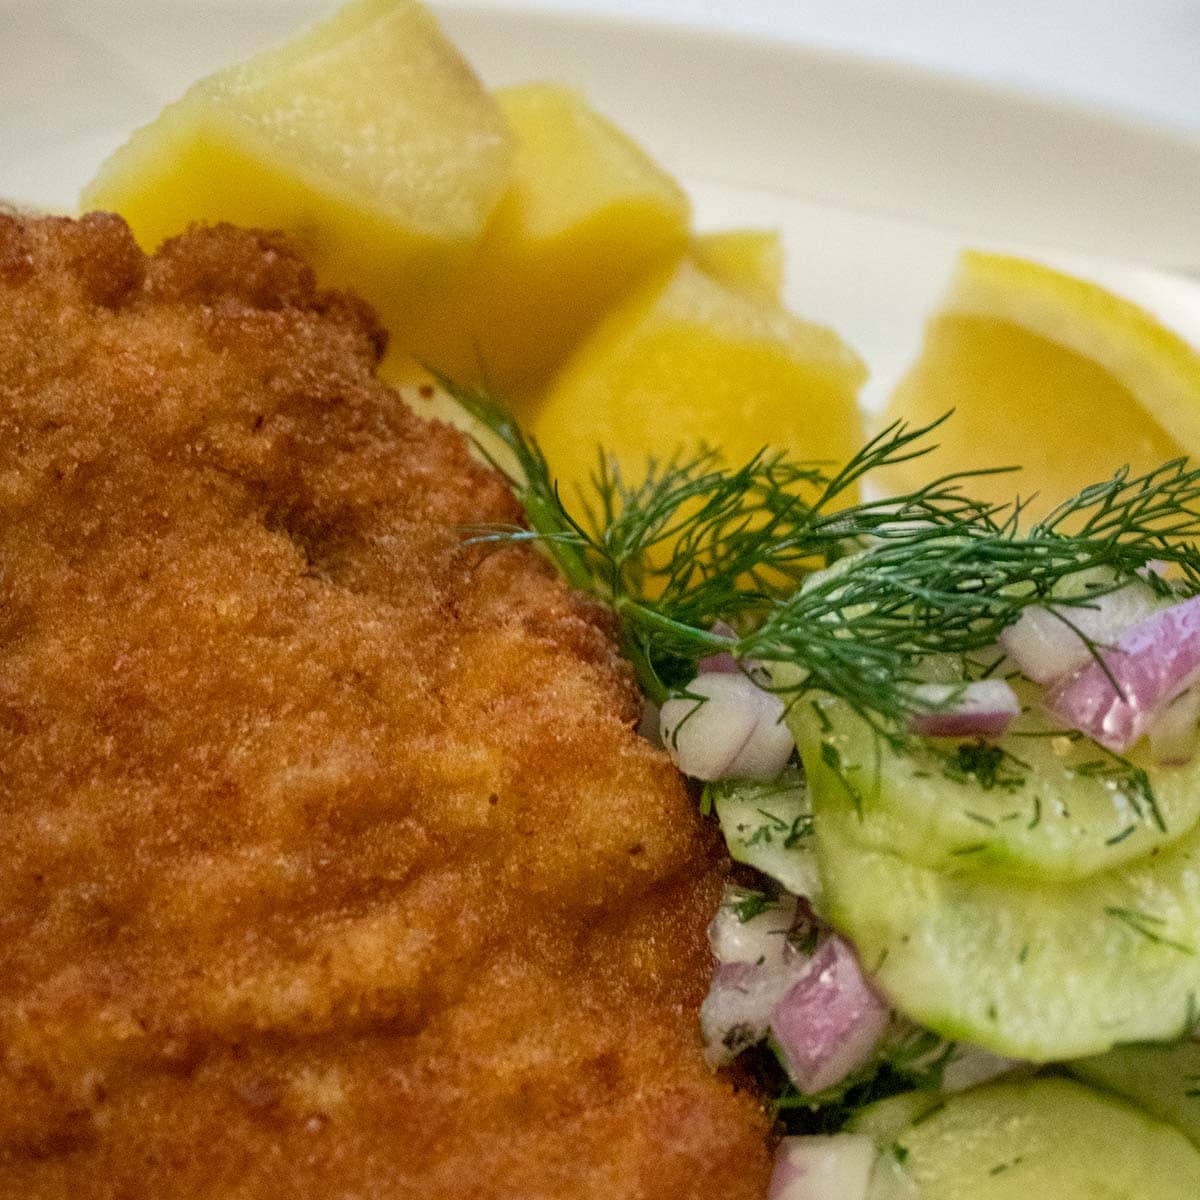 Schnitzel with cucumber salad and potatoes on the side